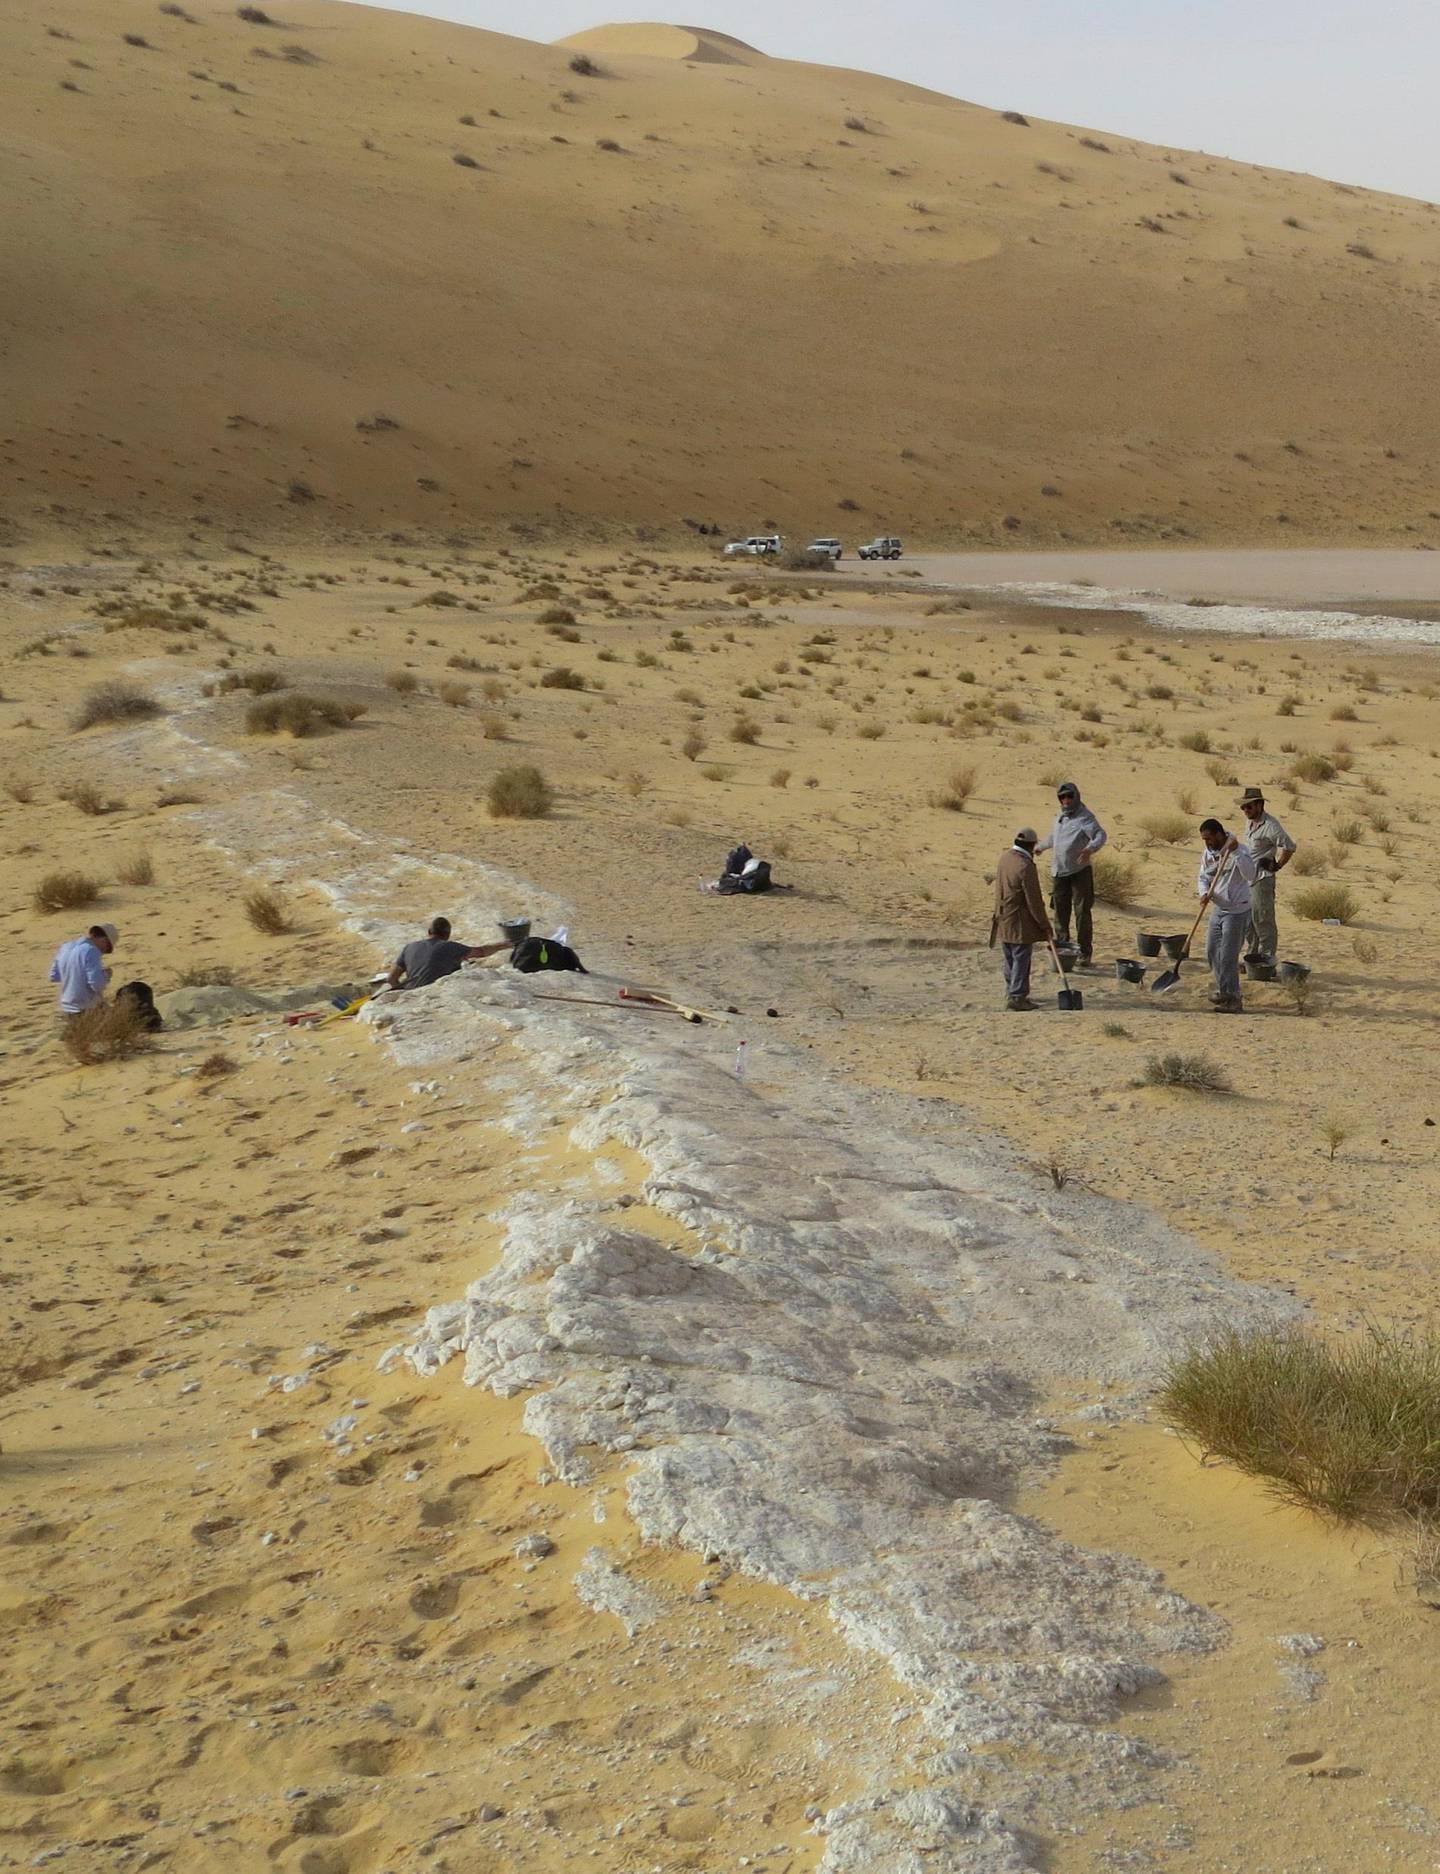 This 2016 photo provided by Michael Petraglia shows a general view of the excavations at the Al Wusta archaeological site in Saudi Arabia. The ancient lake bed (in white) is surrounded by sand dunes of the Nefud Desert. In a report released on Monday, April 9, 2018, researchers say a fossil finger bone found here provides a new clue about when and how our species migrated out of Africa, with hunter-gatherers reaching this area by 85,000 years ago. (Michael Petraglia via AP)